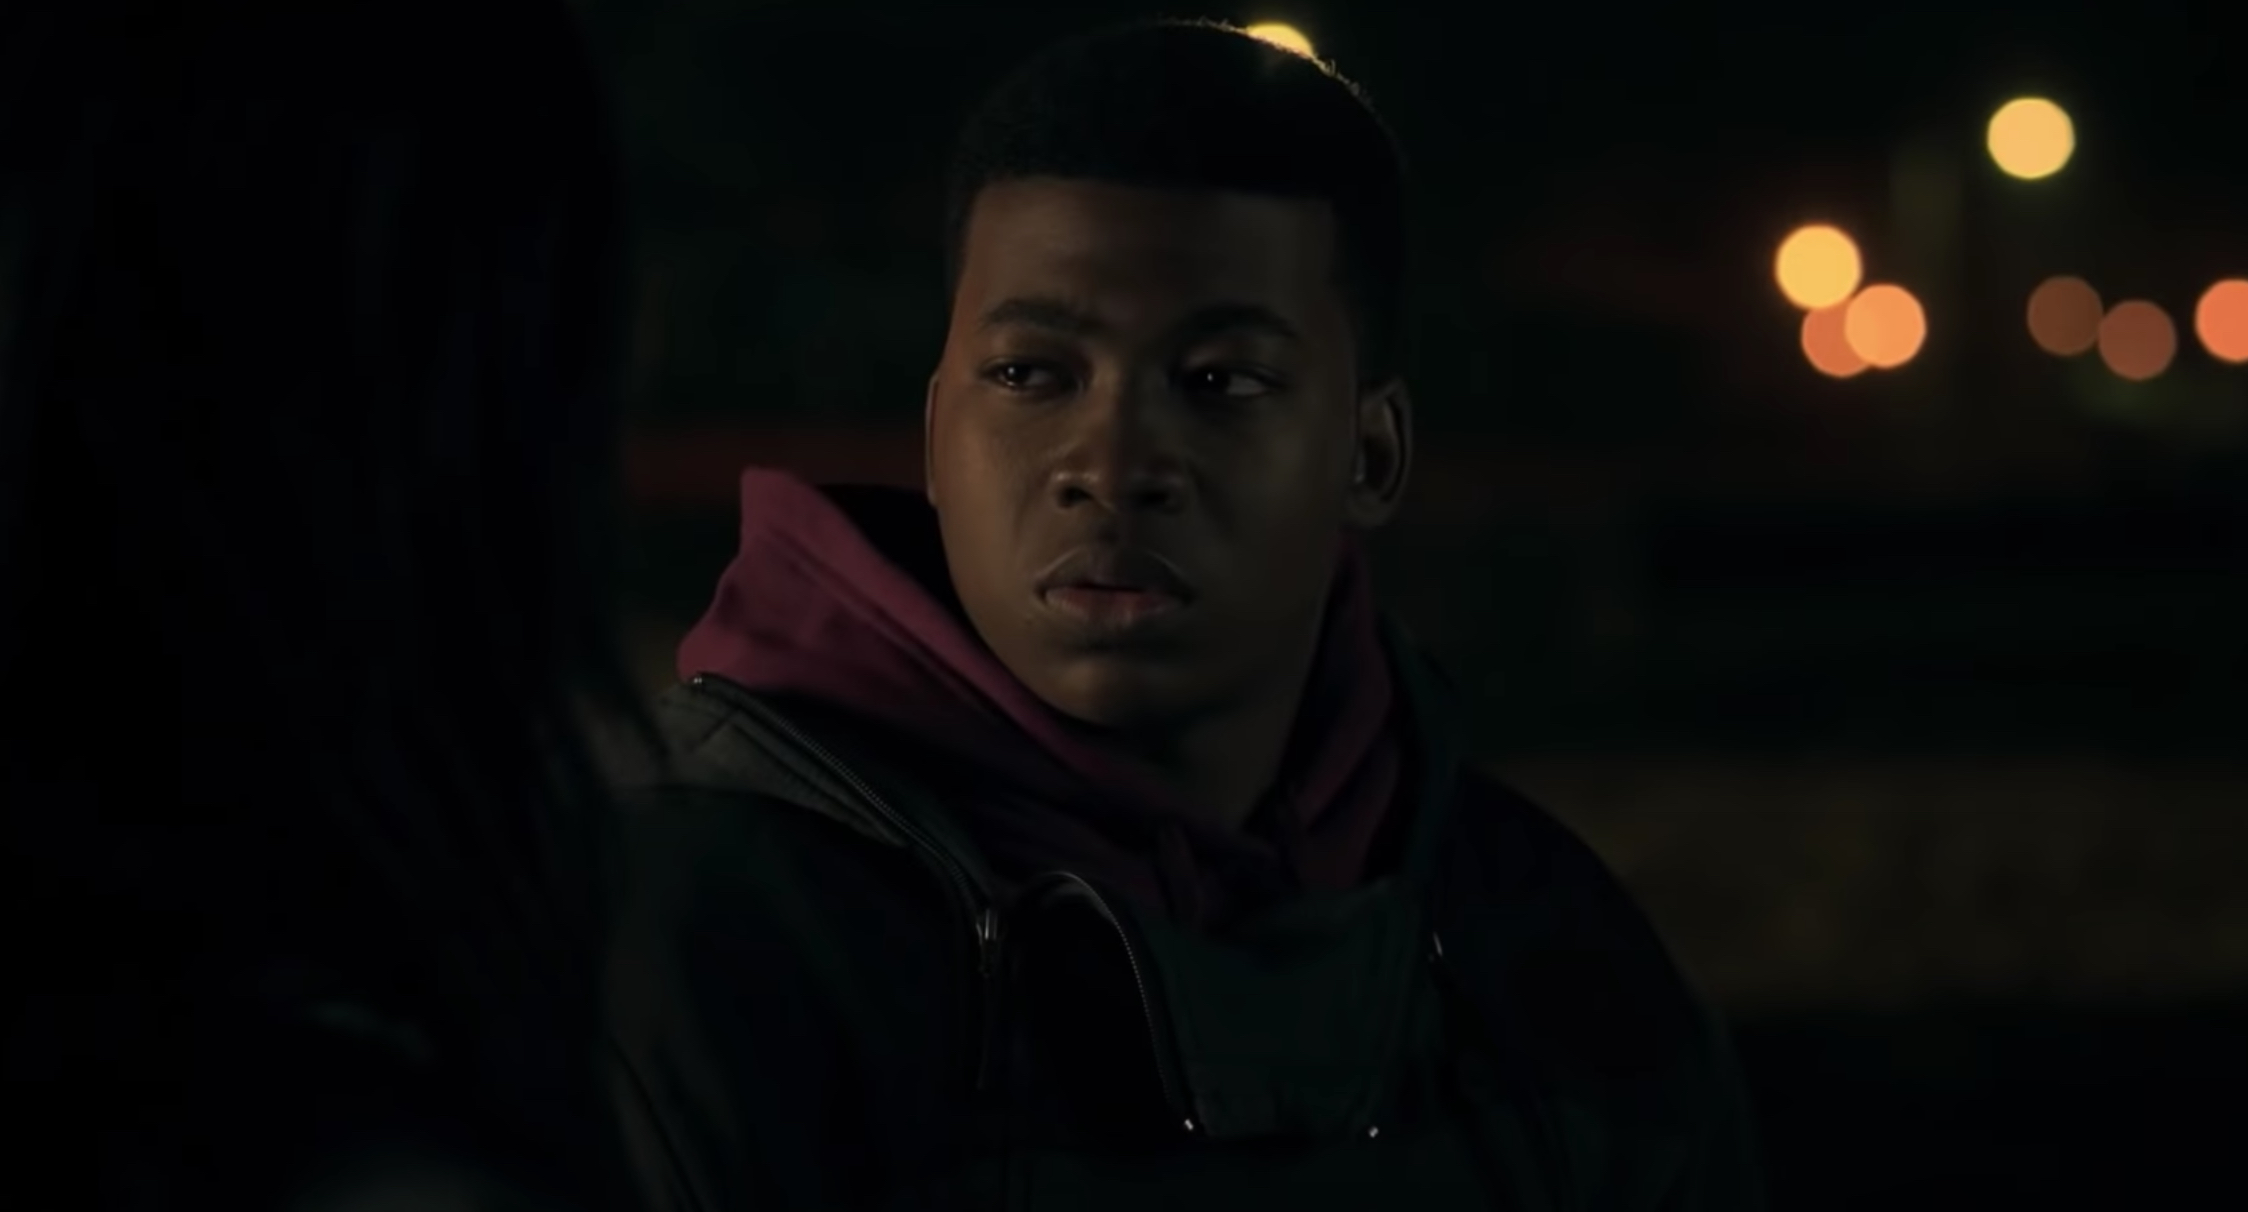 Starz have released the official trailer for the upcoming Power spinoff series Power Book III: Raising Kanan.